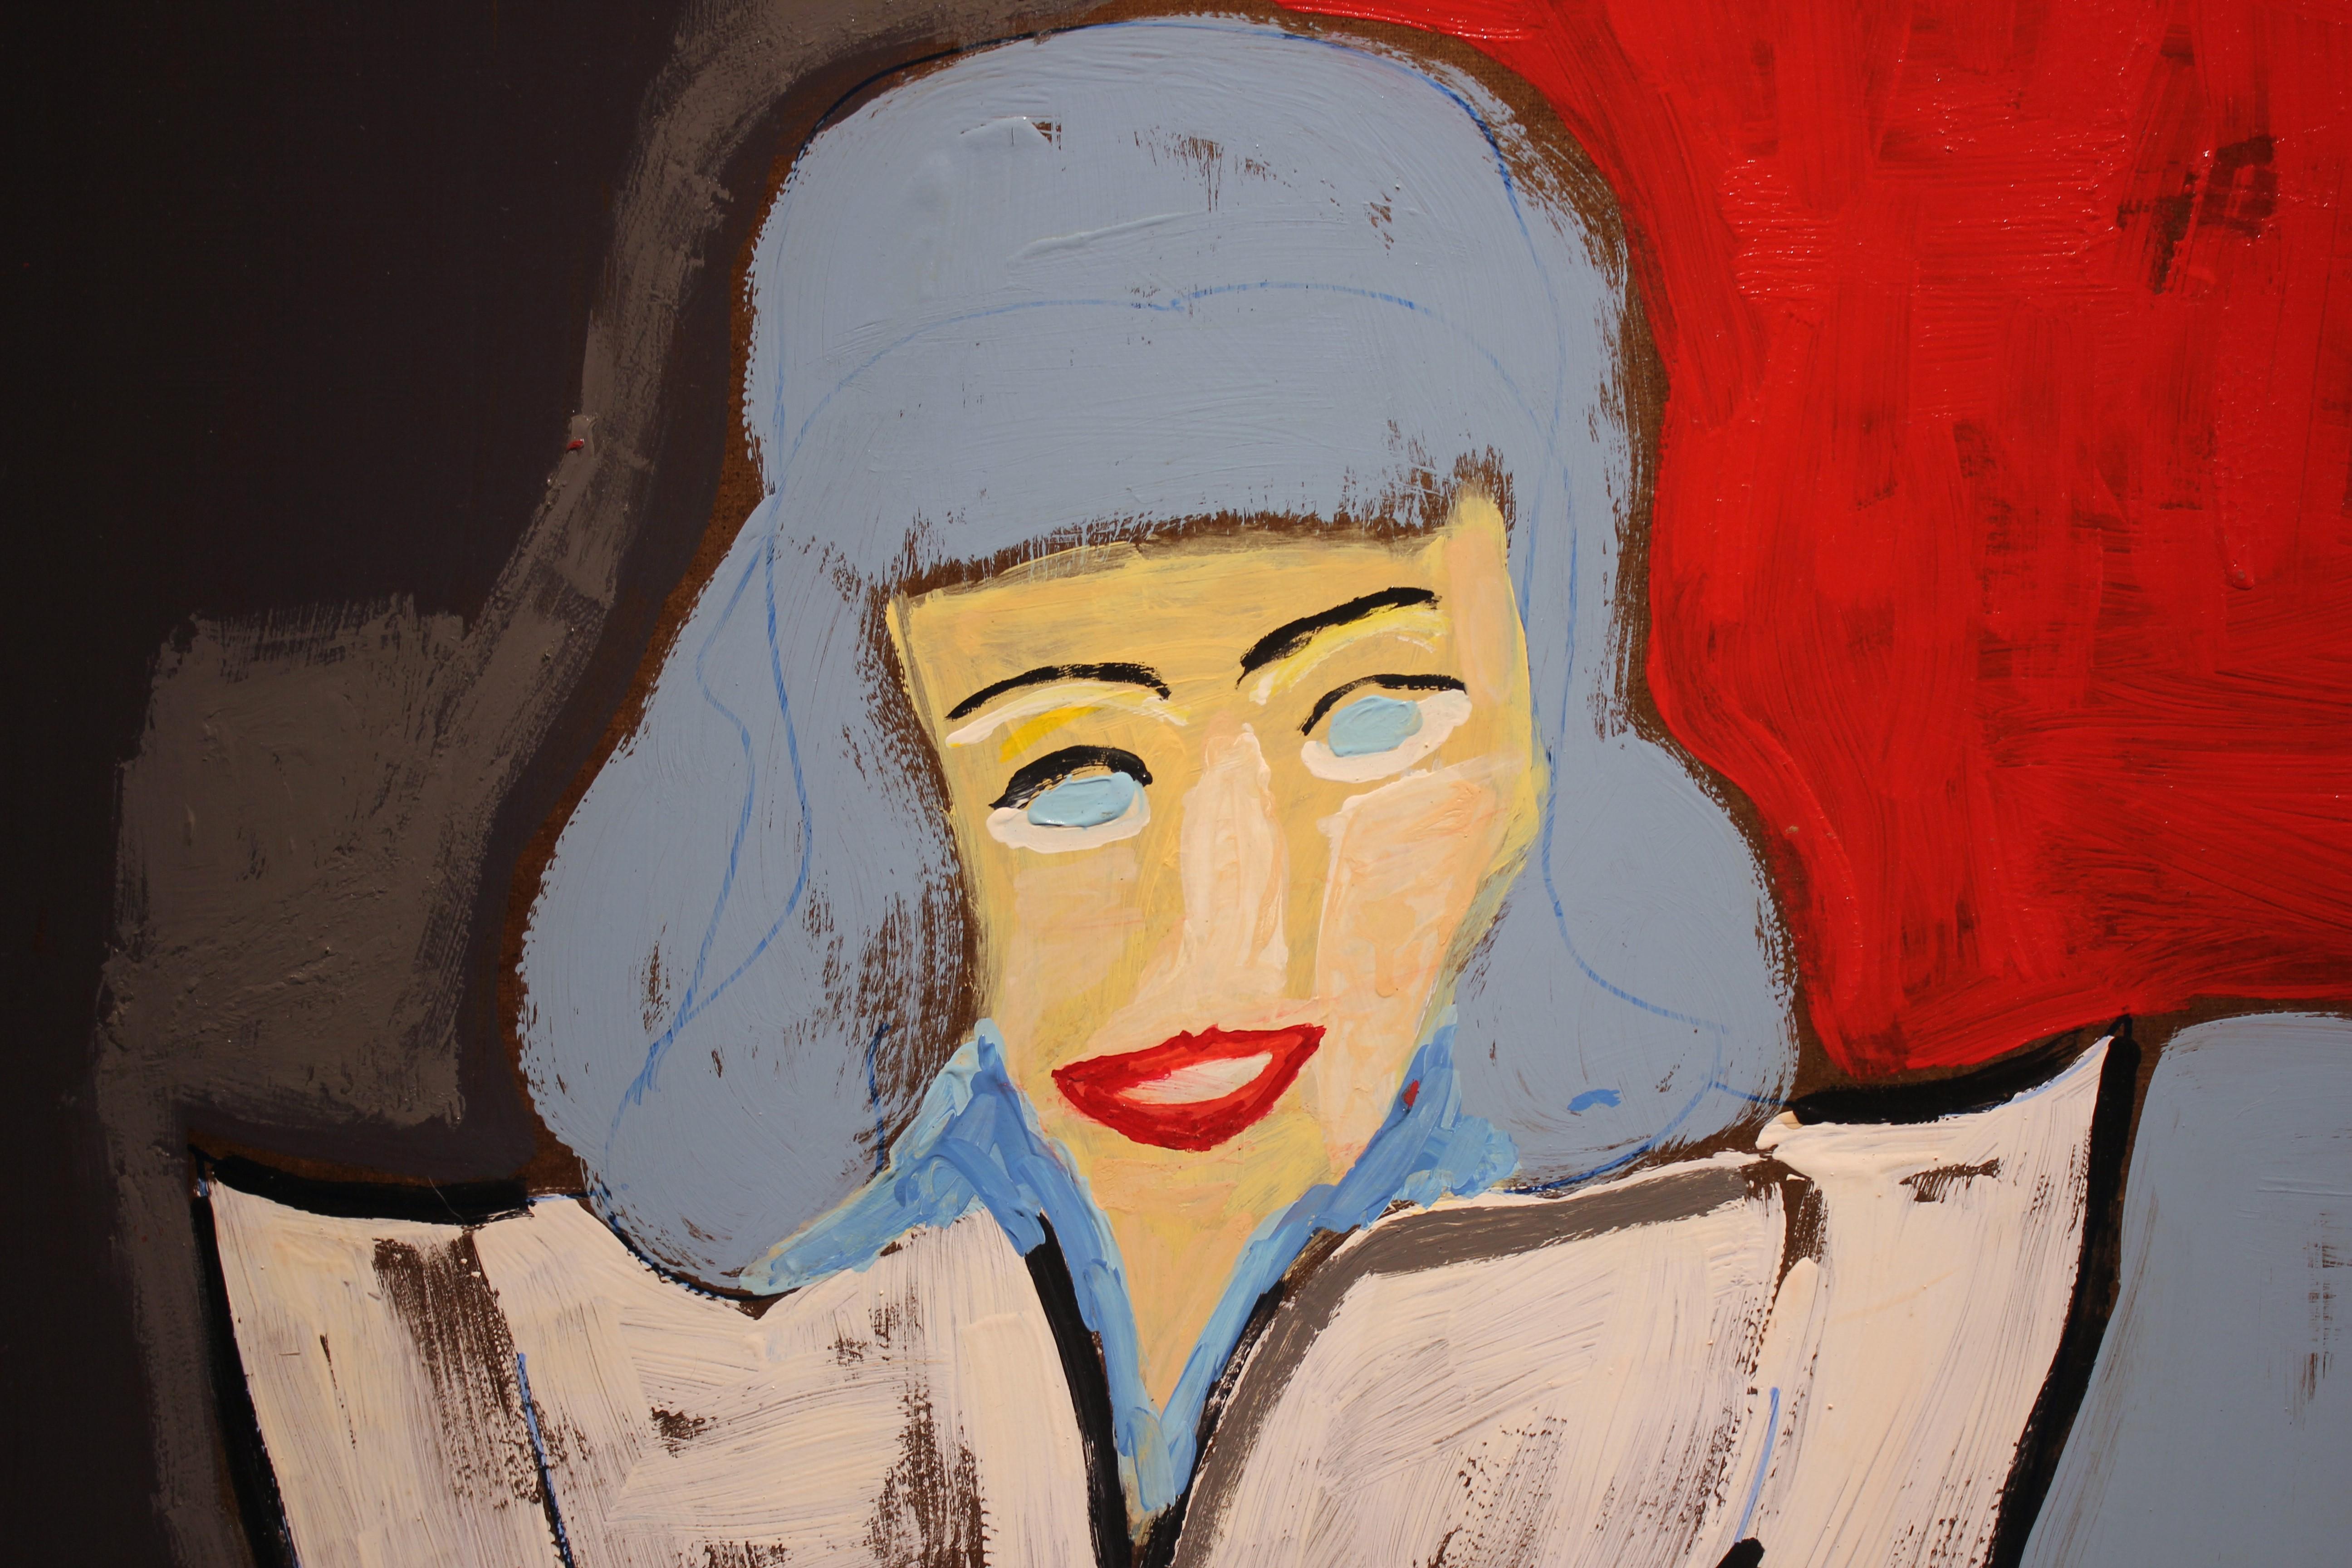 Sophisticated portrait of a woman in blue, yellow and red tones. The work is signed by the artist and dated. It is framed in a dark blue floating frame.
Dimensions without Frame: H 36 in x W 24 in.

Artist Biography: Paul Reeves is the former owner